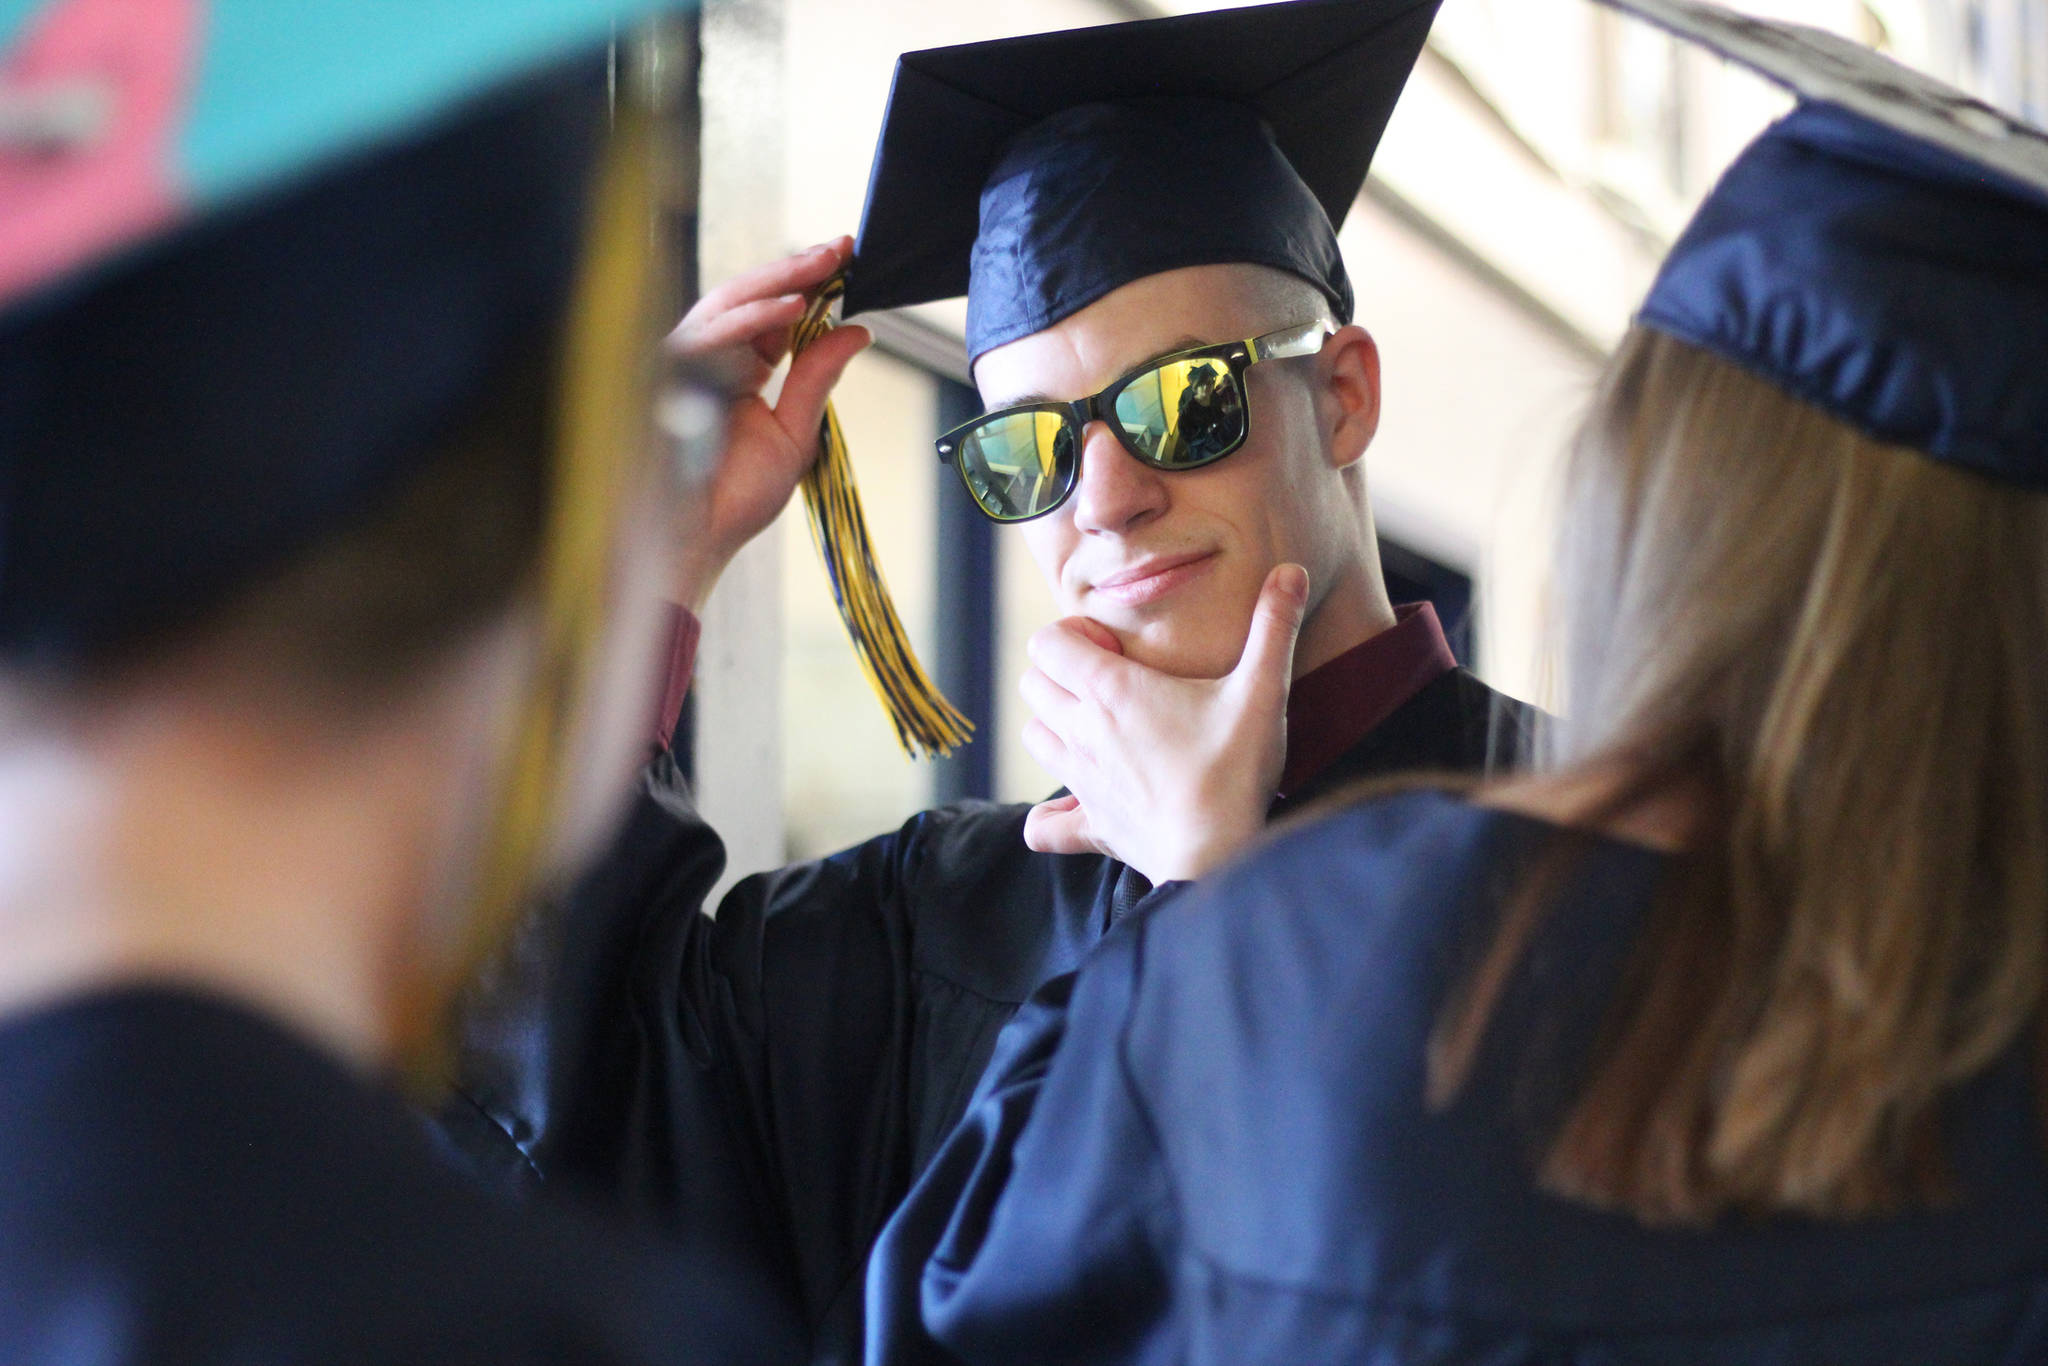 Isabella Koch helps Garrett Koch perfect the finishing touches before they walk in their graduation ceremony Tuesday, May 21, 2019 at Ninilchik School in Ninilchik, Alaska. They are two of four total Ninilchik graduates this year. (Photo by Megan Pacer/Homer News)